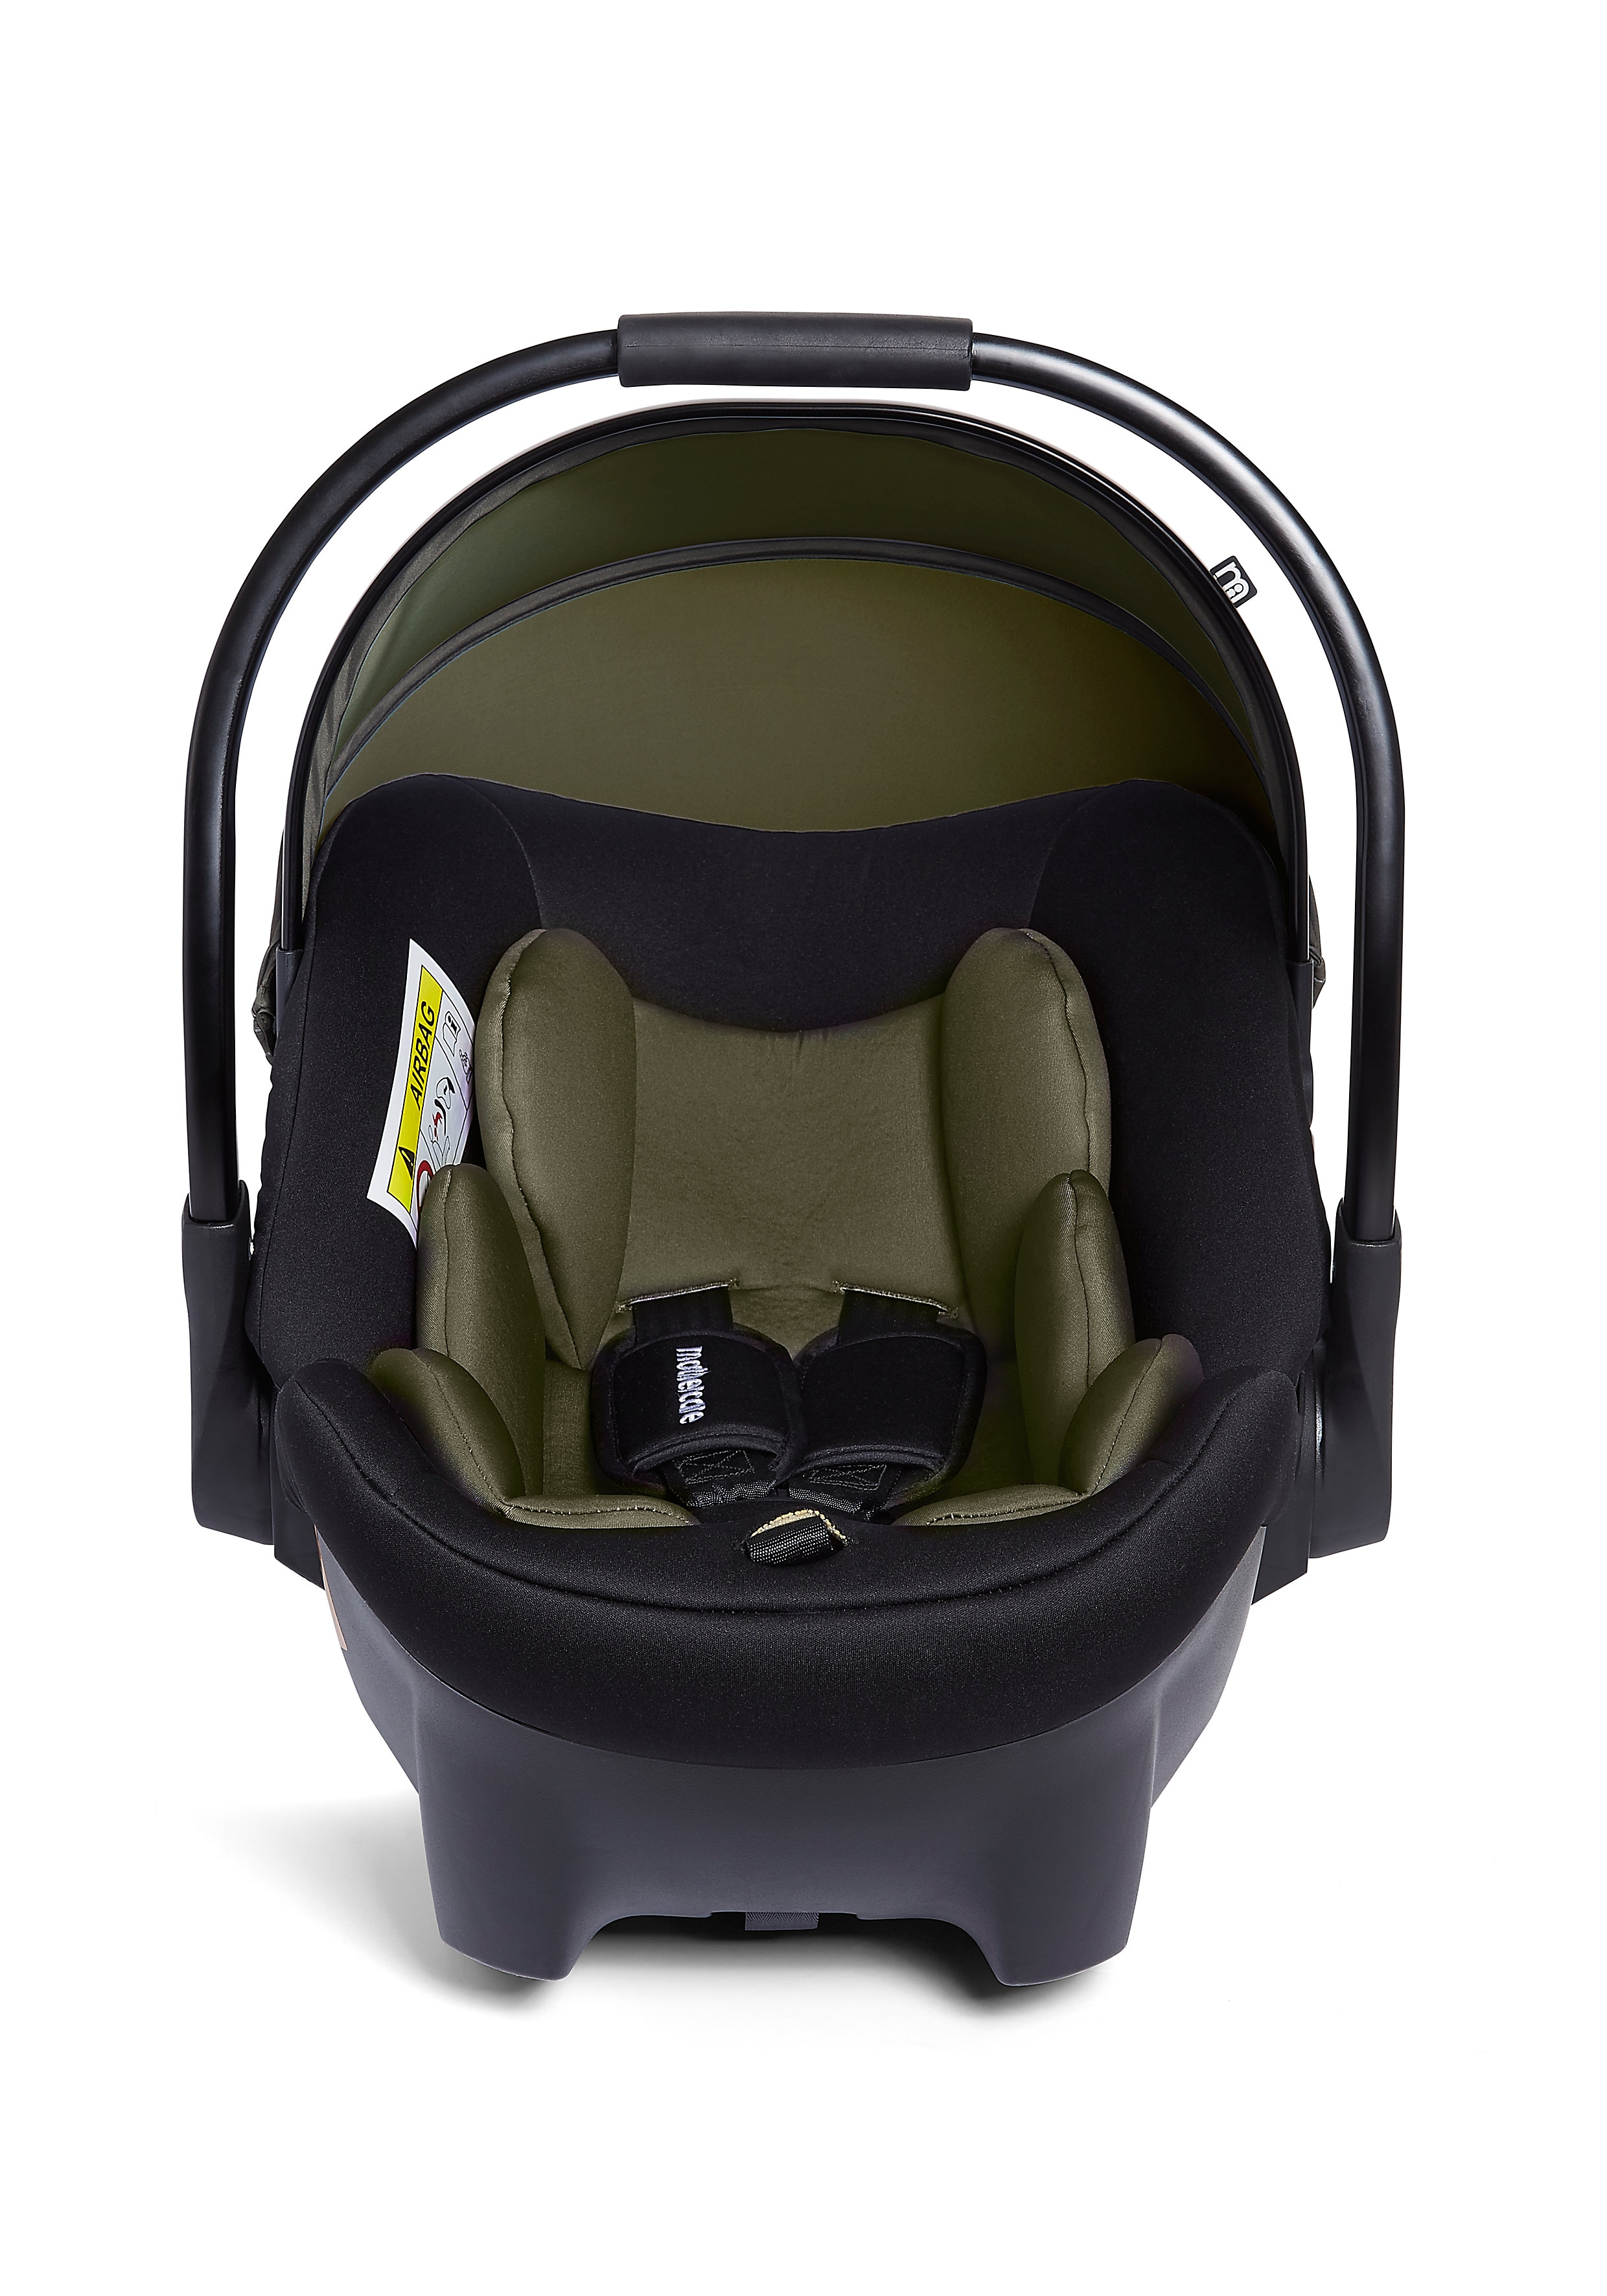 Mothercare | Mothercare Baby Metal Framed 3 Wheel Journey Black And Khaki